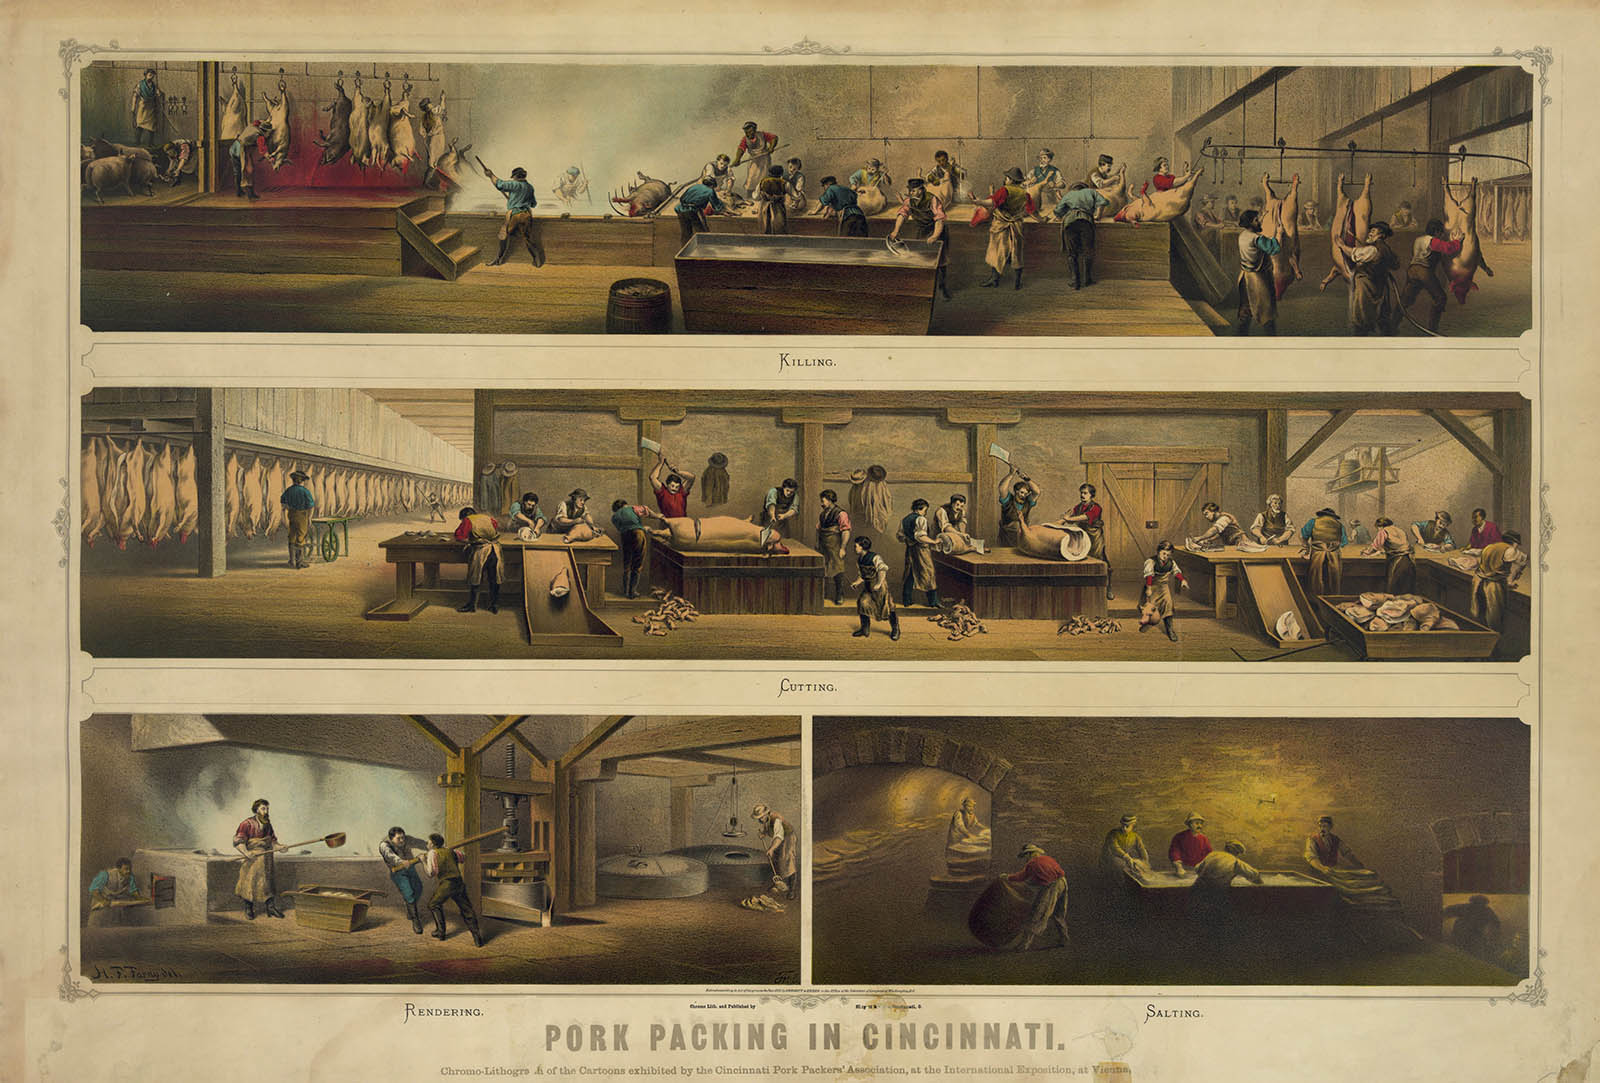 Images showing the four steps of meat-packing: killing, cutting, rendering, and salting.